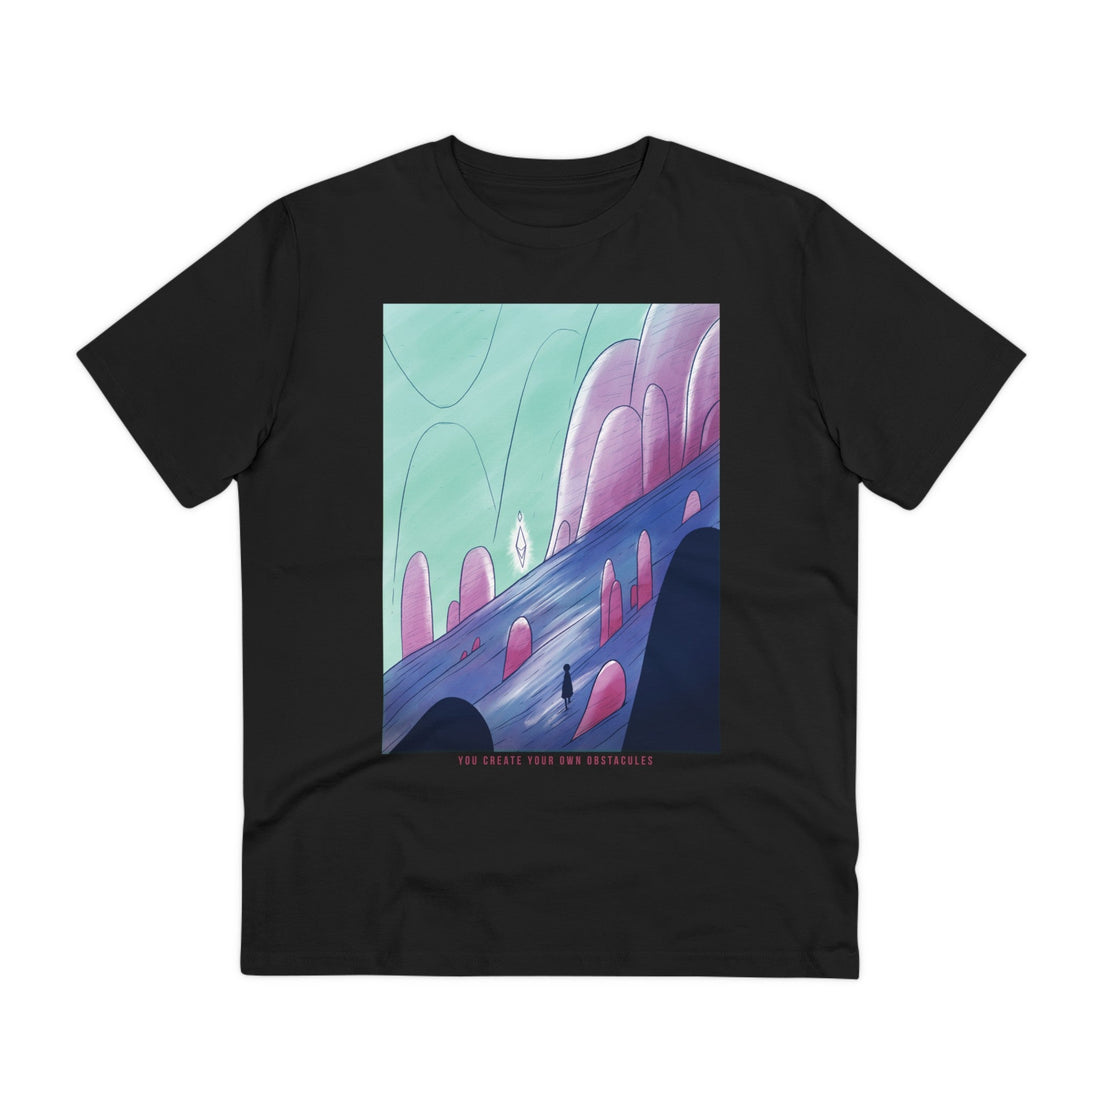 Printify T-Shirt Black / 2XS You create your own obstacules - Watercolor Fantasy - Front Design